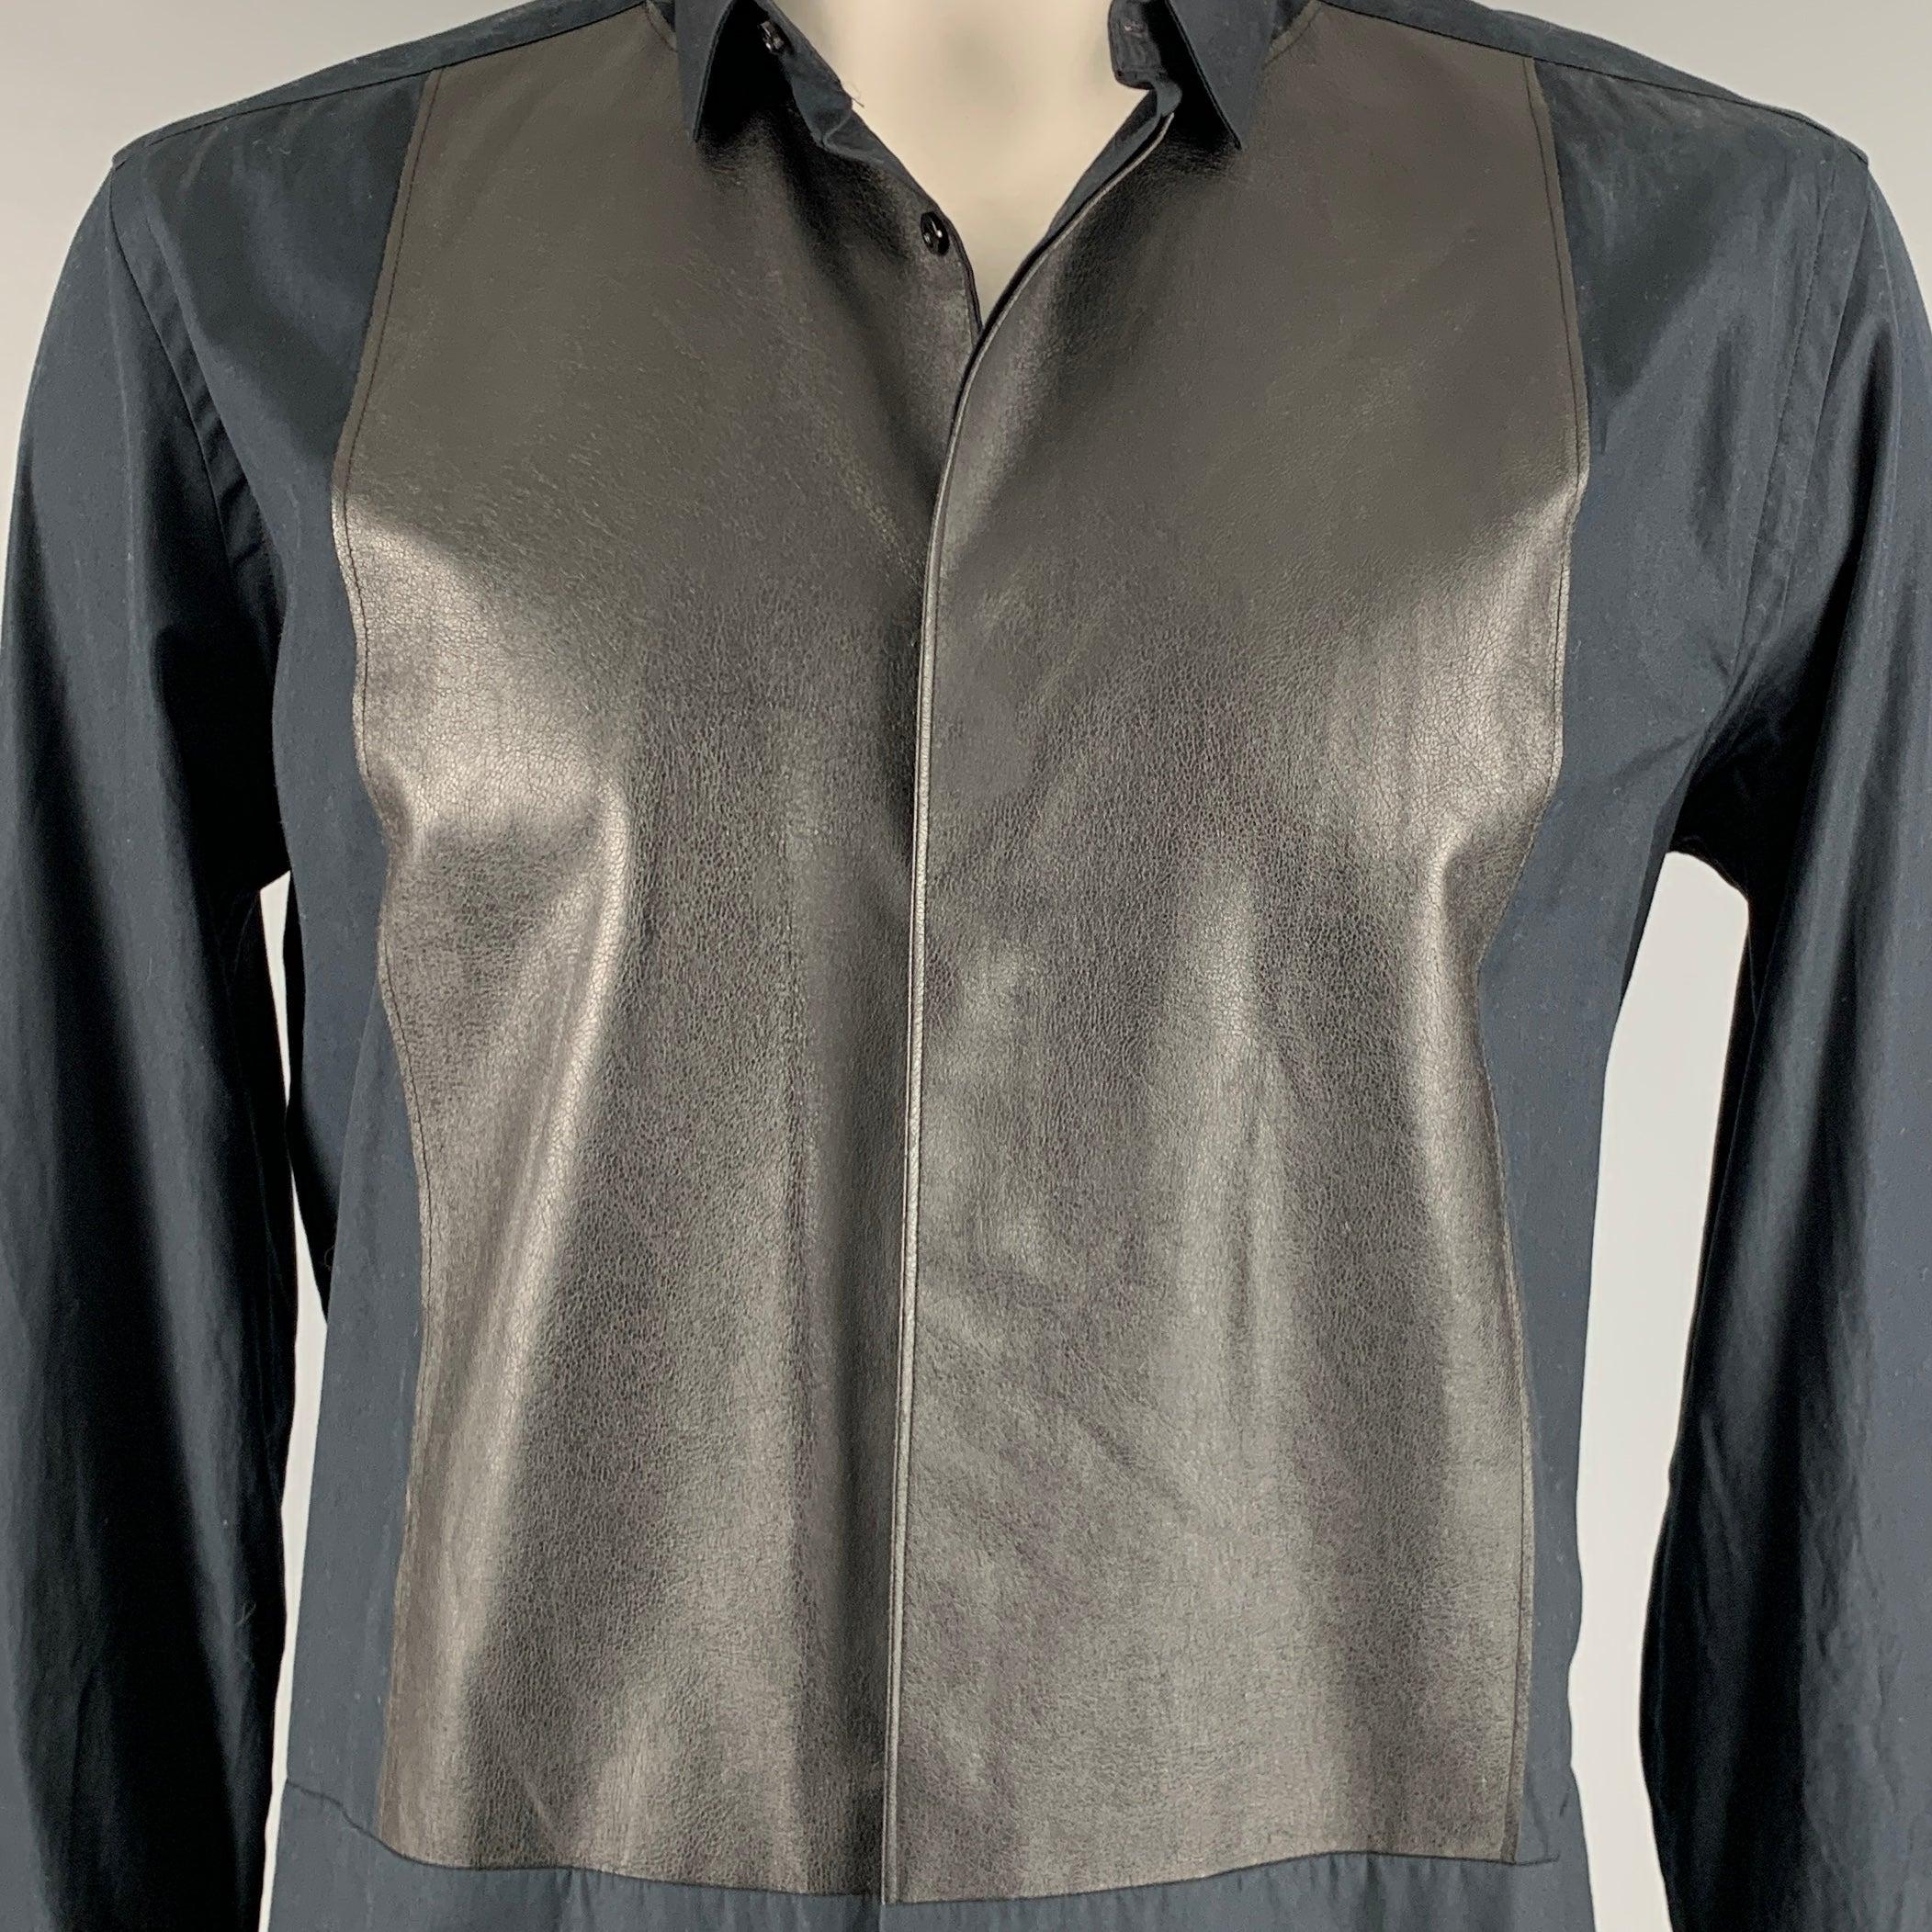 NEIL BARRETT long sleeve shirt
in a black cotton fabric featuring
polyester faux leather front, skinny fit, and hidden button closure. Made in Italy.Excellent Pre-Owned Condition. 

Marked:   43/17 

Measurements: 
 
Shoulder: 18 inches Chest: 44